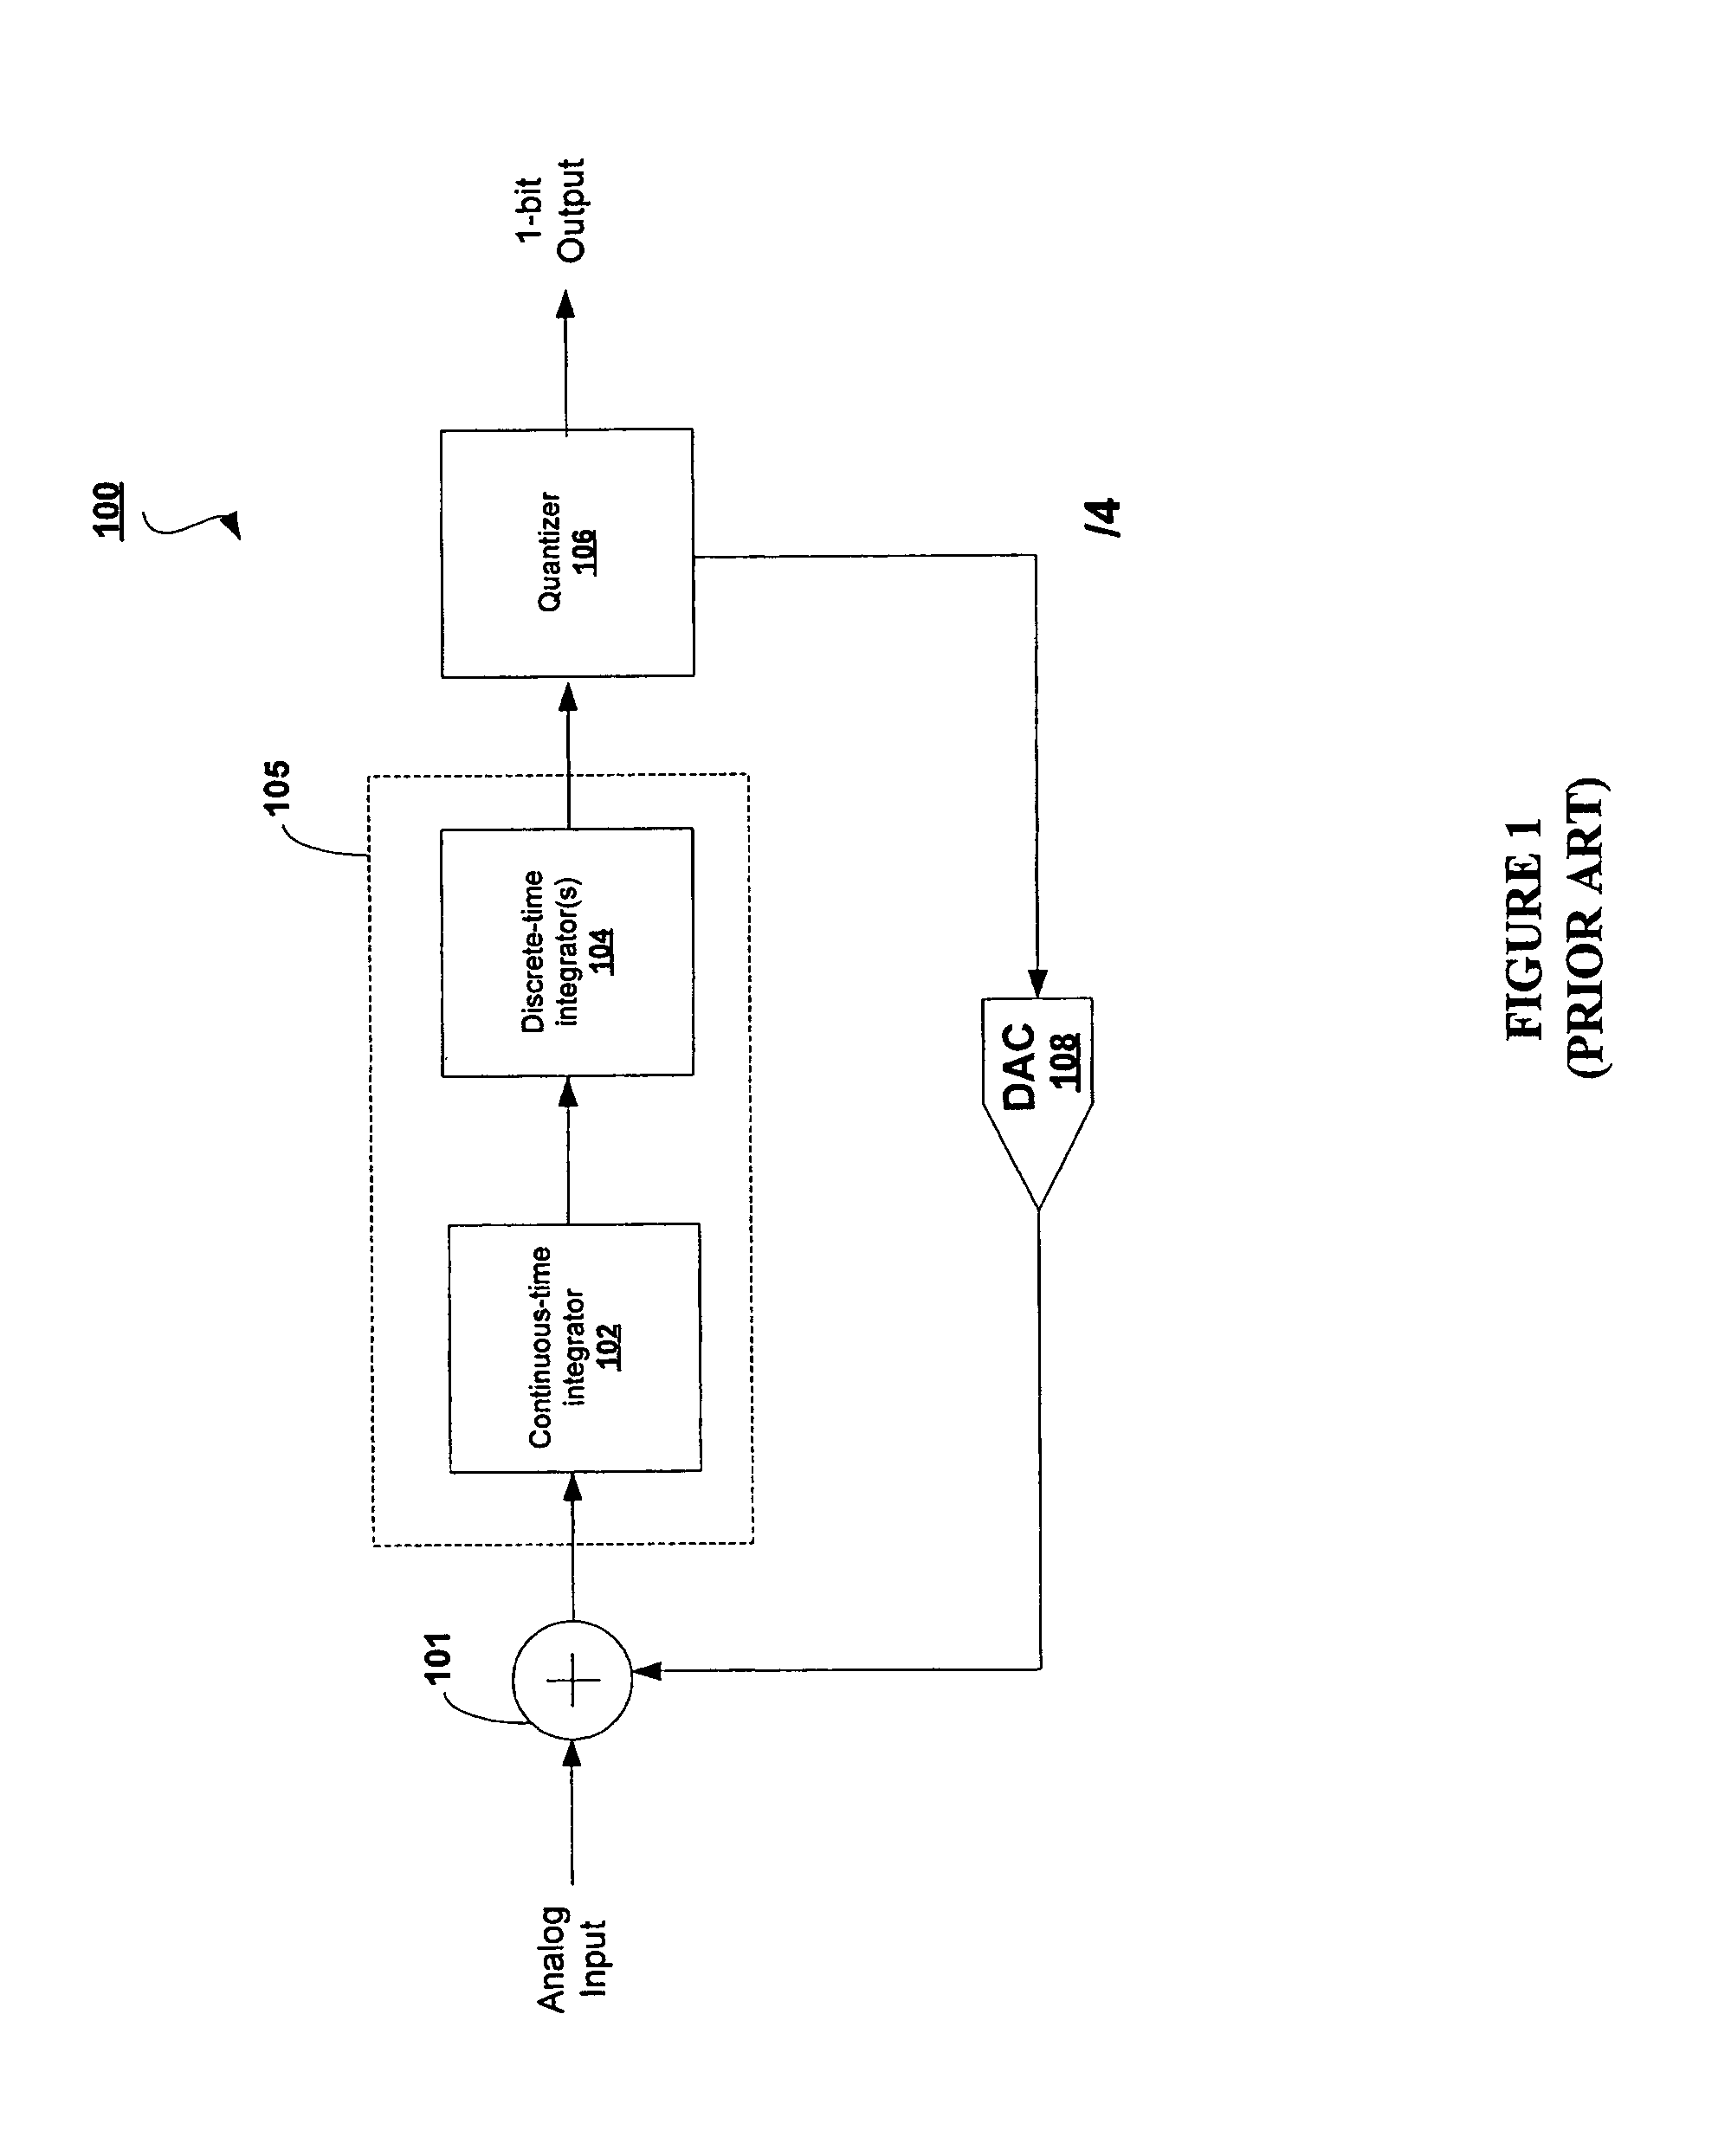 Hybrid tuning circuit for continuous-time sigma-delta analog-to-digital converter